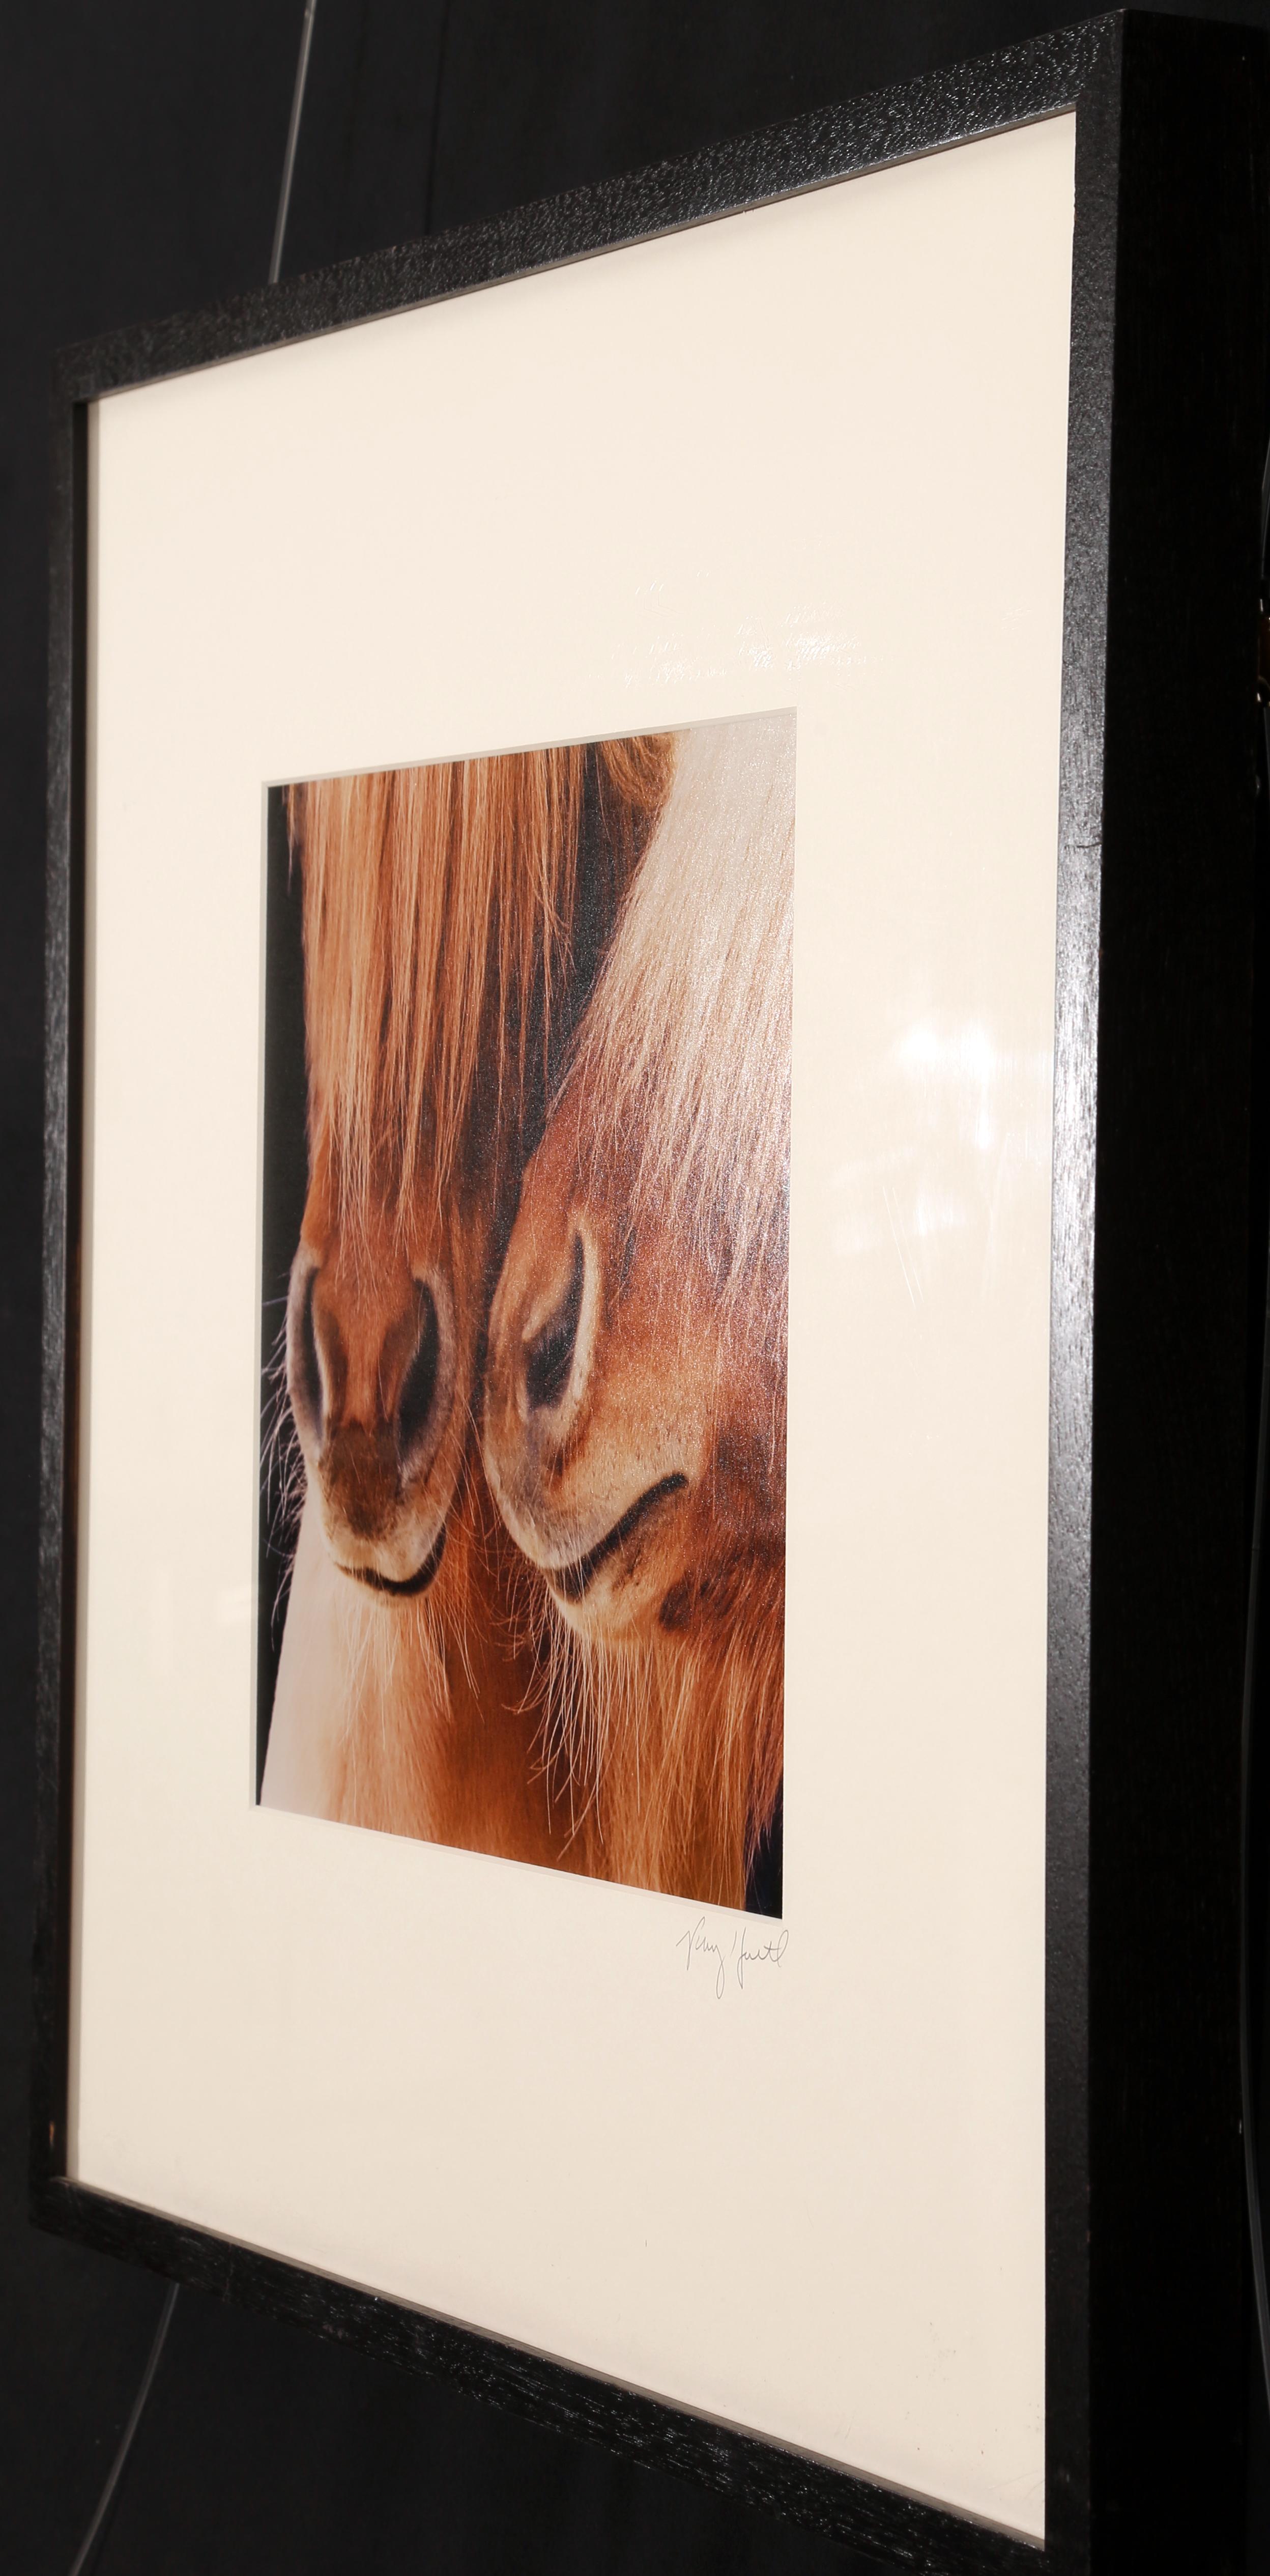 Ray Hartl
Equine Photograph #863
Color photograph
Framed Dimensions: 20 x 20 inches  (50.8 x 50.8 cm)
Image Dimensions: 10 1/2 x 10 1/2 inches  (26.7 x 26.7 cm)